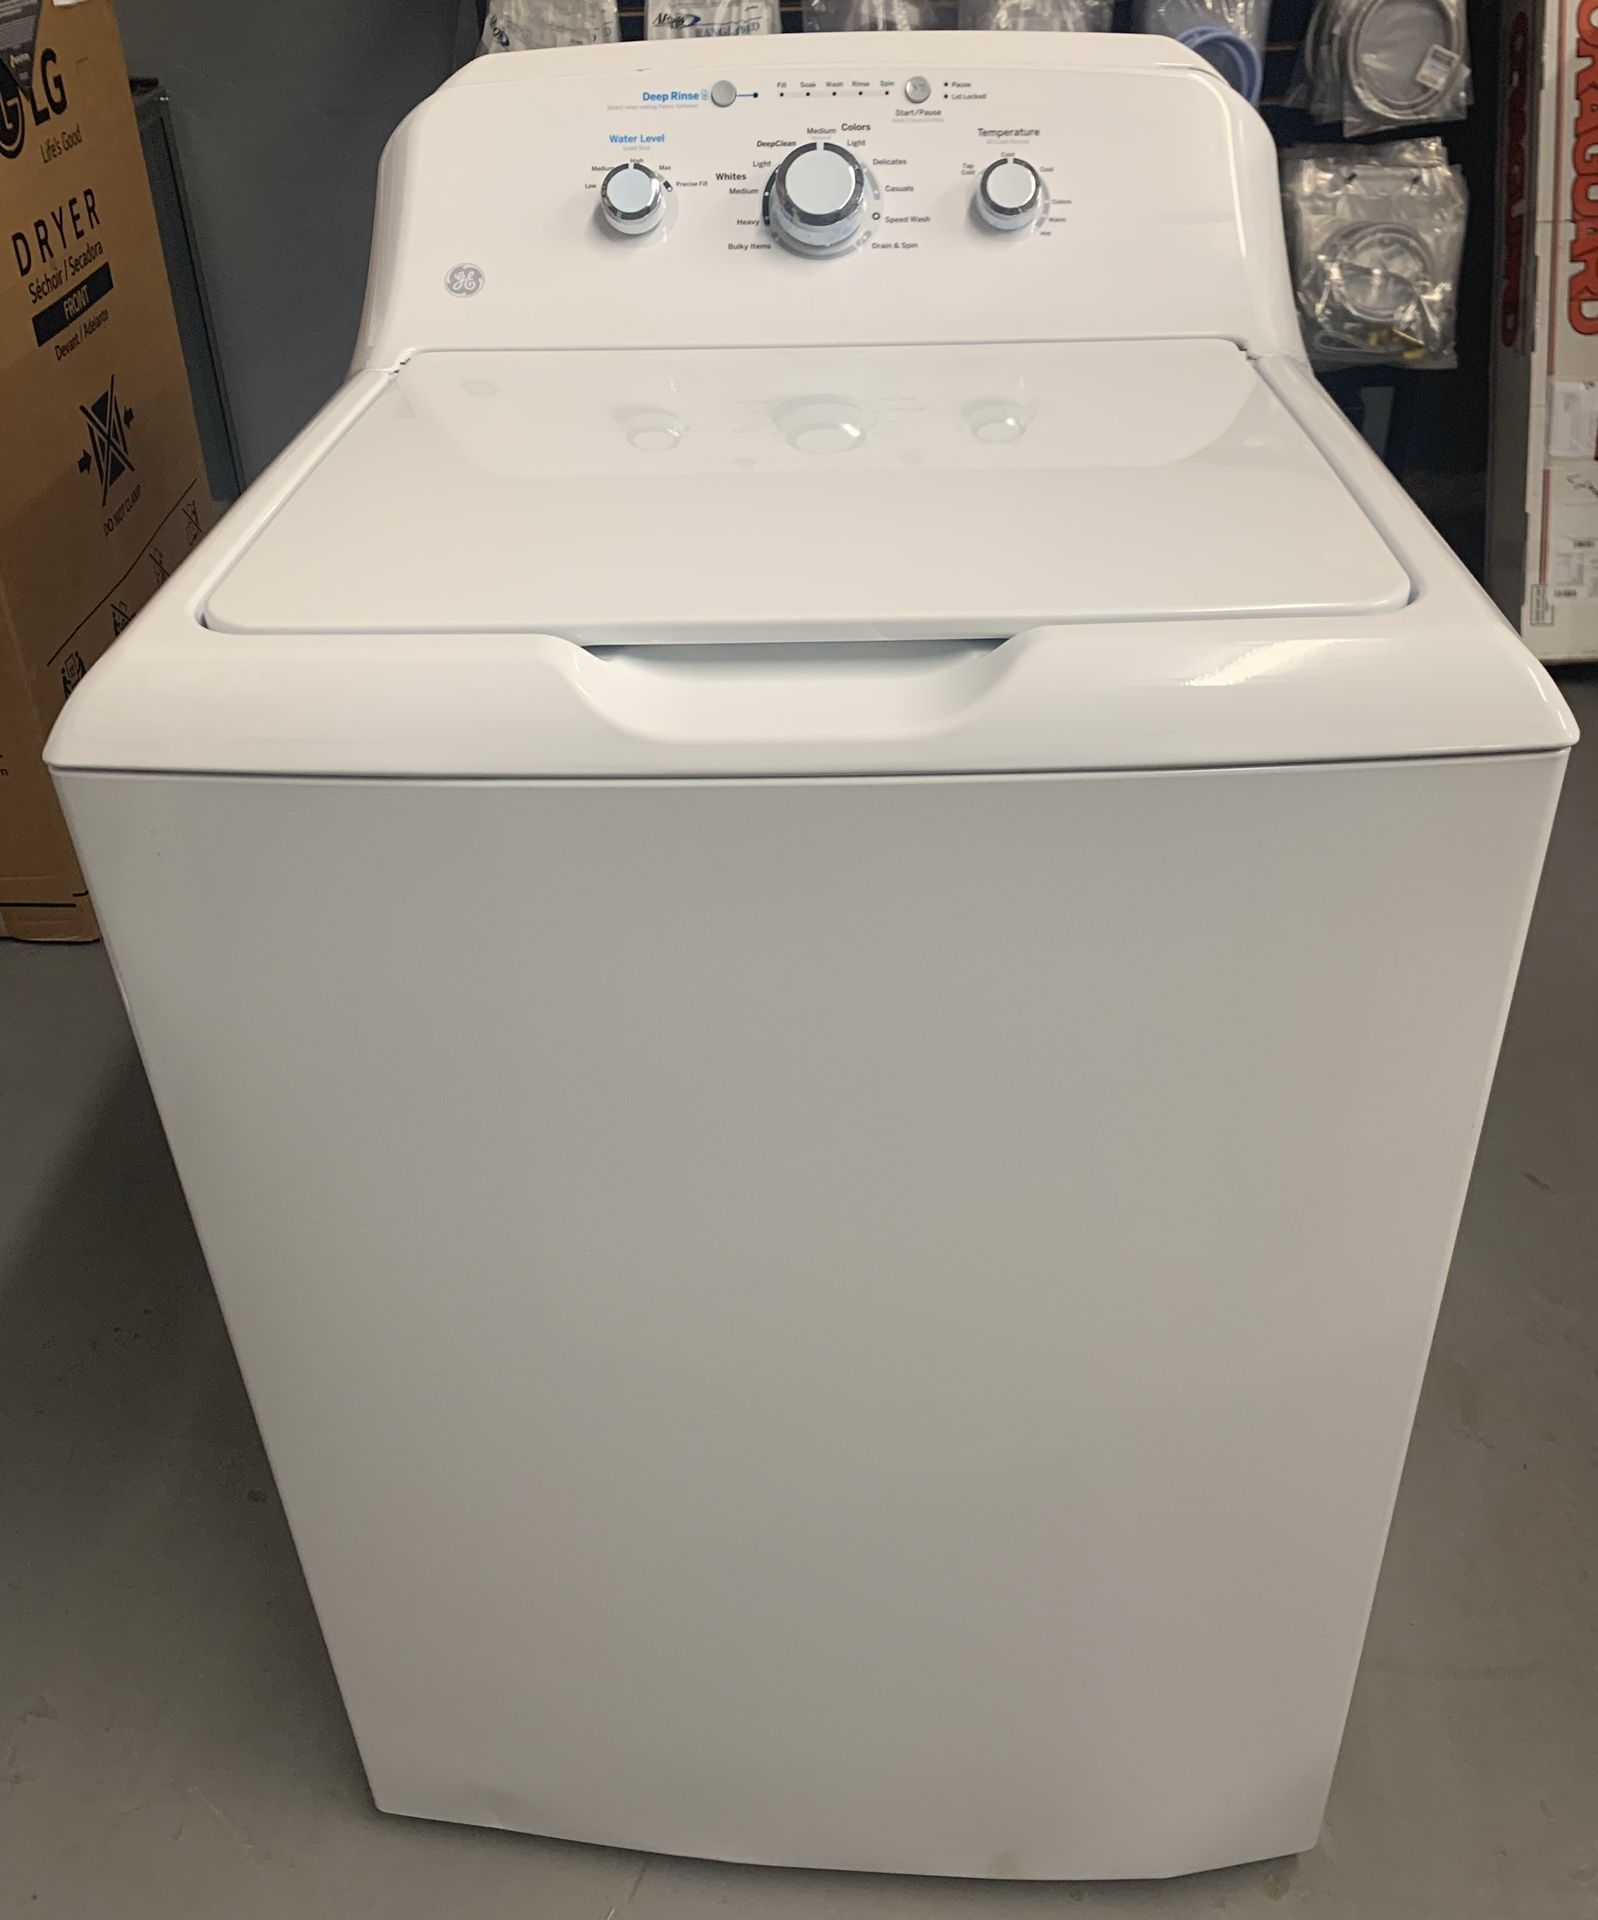 BRAND NEW!! GE Washer- ONE YEAR WARRANTY INCLUDED!